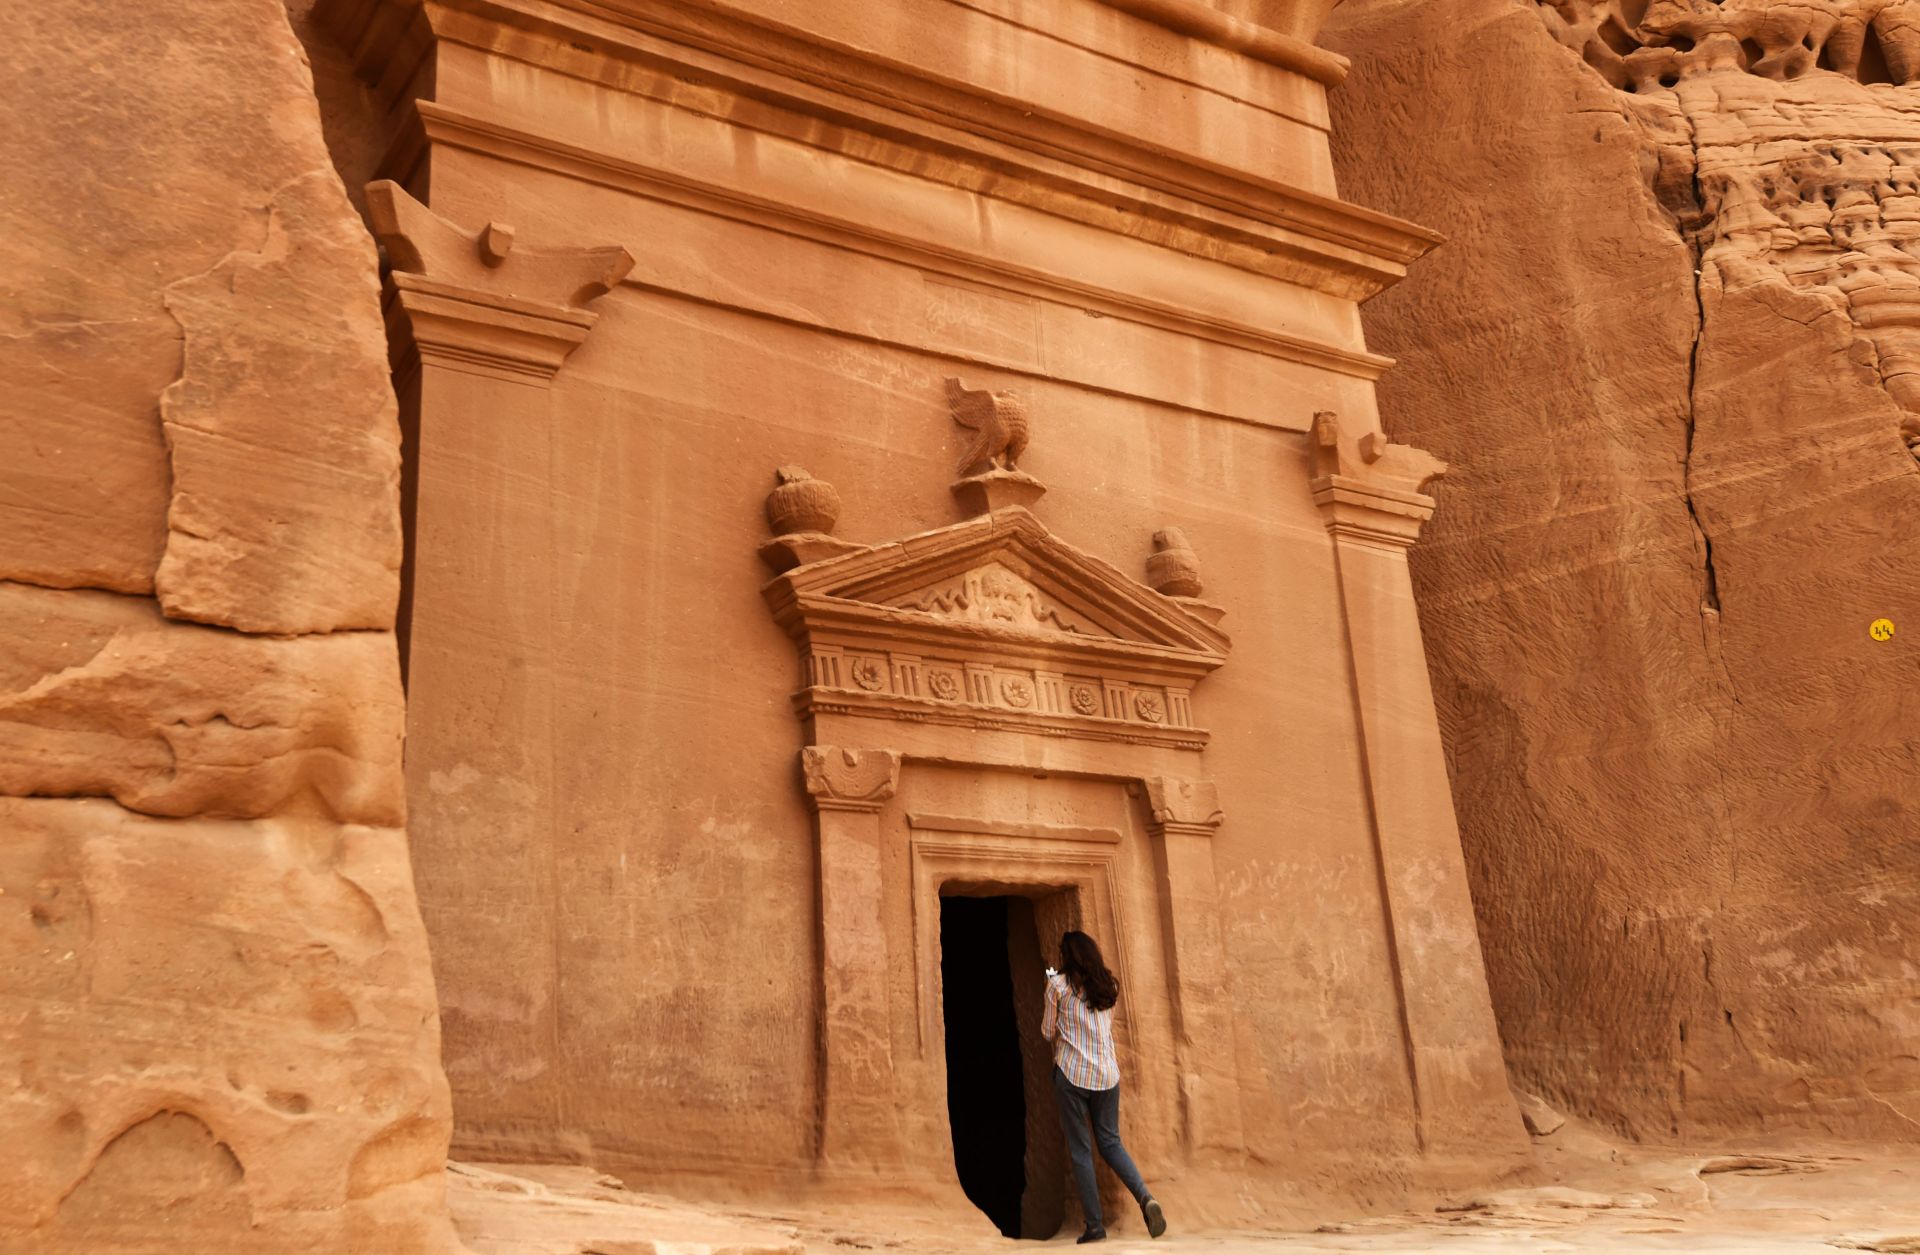 A journalist takes a picture of a tomb at Madain Saleh, a UNESCO World Heritage site, in Saudi Arabia's northwest on March 31, 2018.